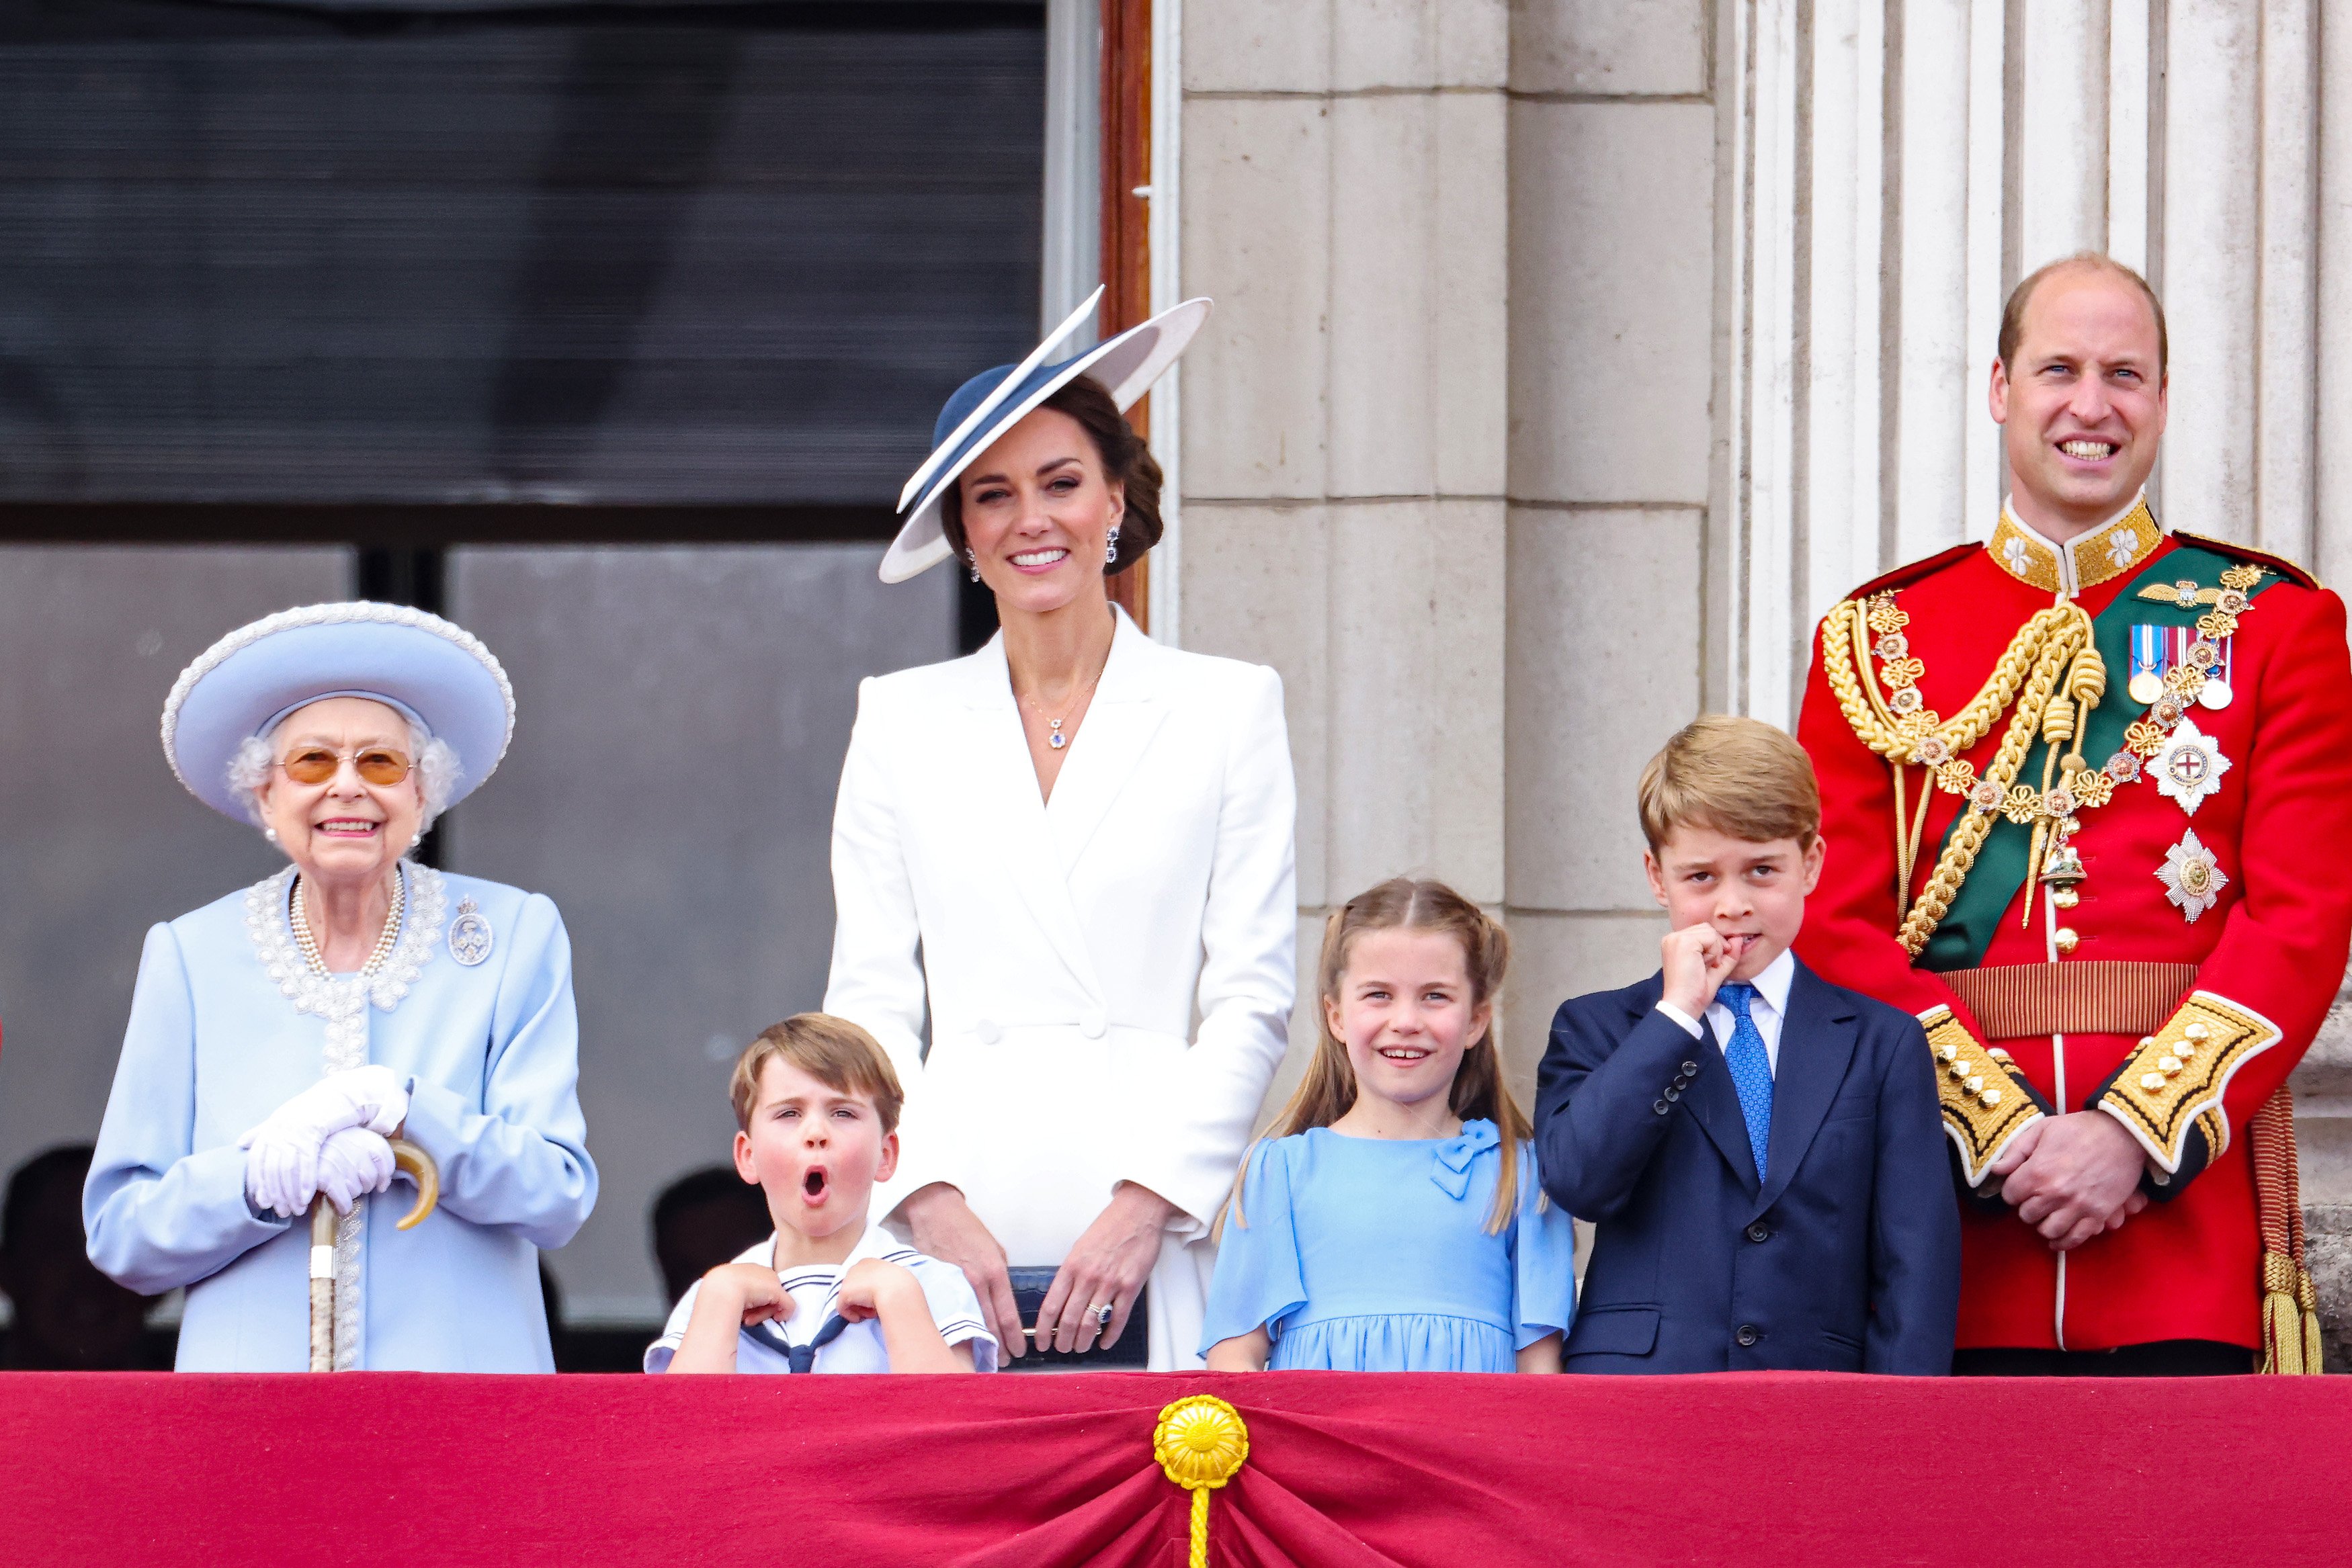 Queen Elizabeth II, Prince Louis, Catherine, Duchess of Cambridge, Princess Charlotte, Prince George, and Prince William watch the RAF flypast on the balcony of Buckingham Palace during the Trooping the Colour parade on June 02, 2022, in London, England. | Source: Getty Images